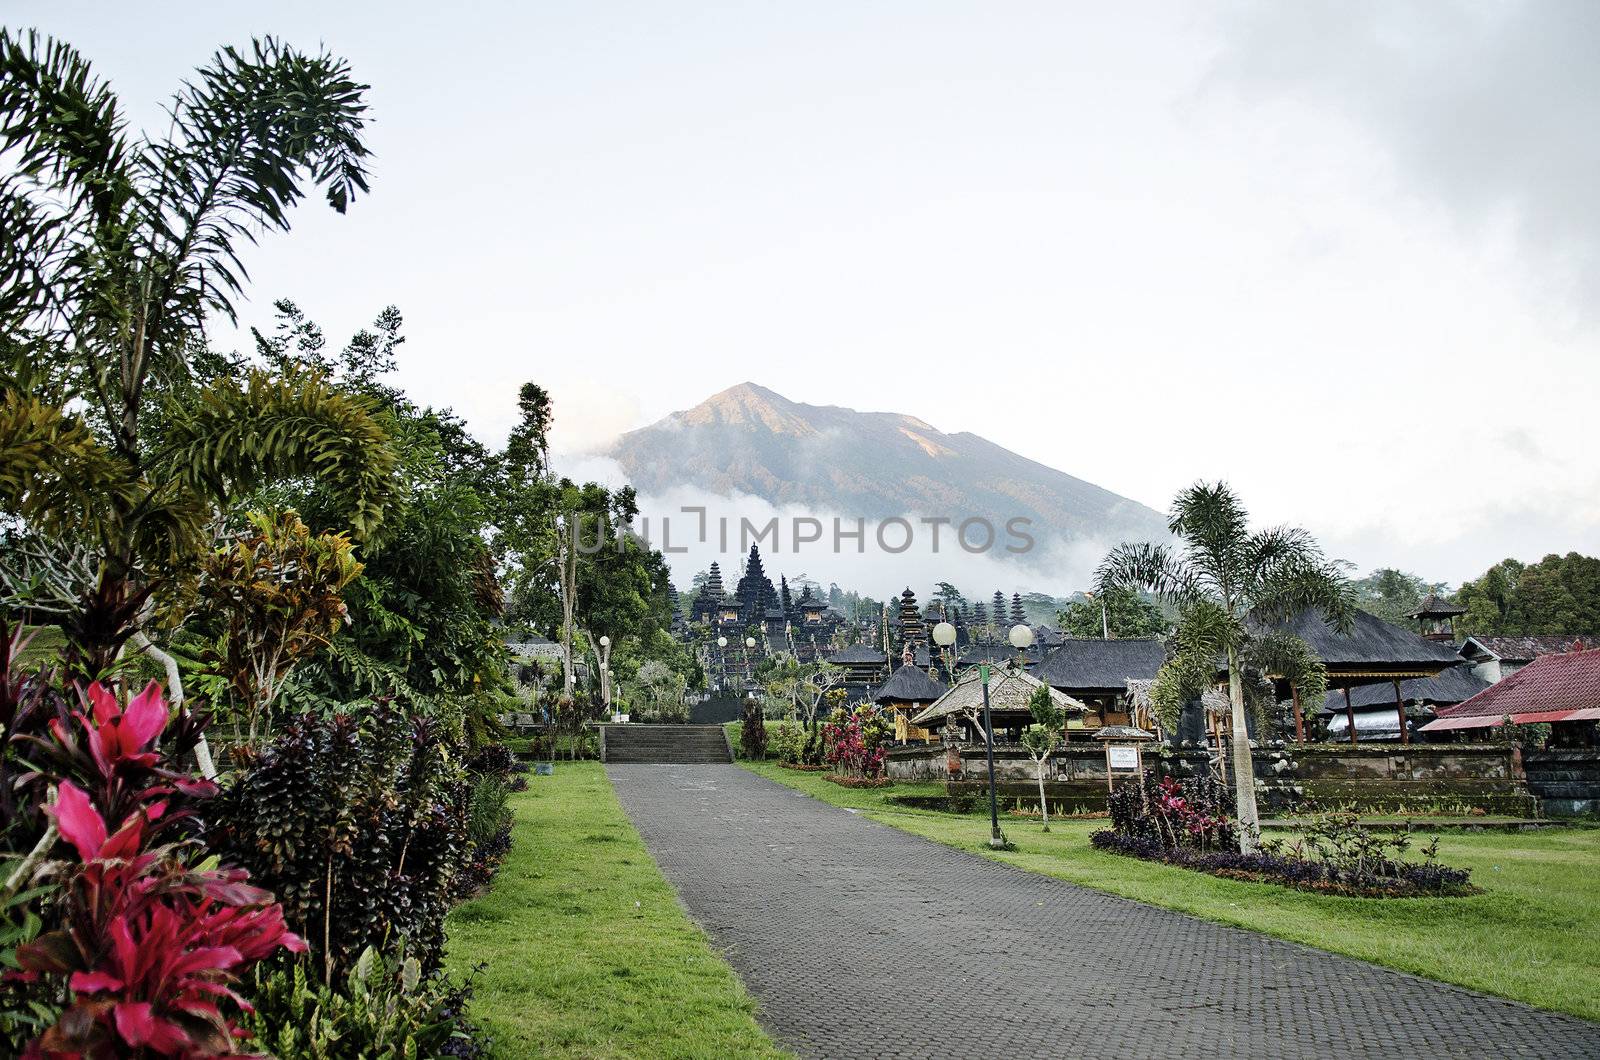 besakih temple and mount agung in bali indonesia by jackmalipan